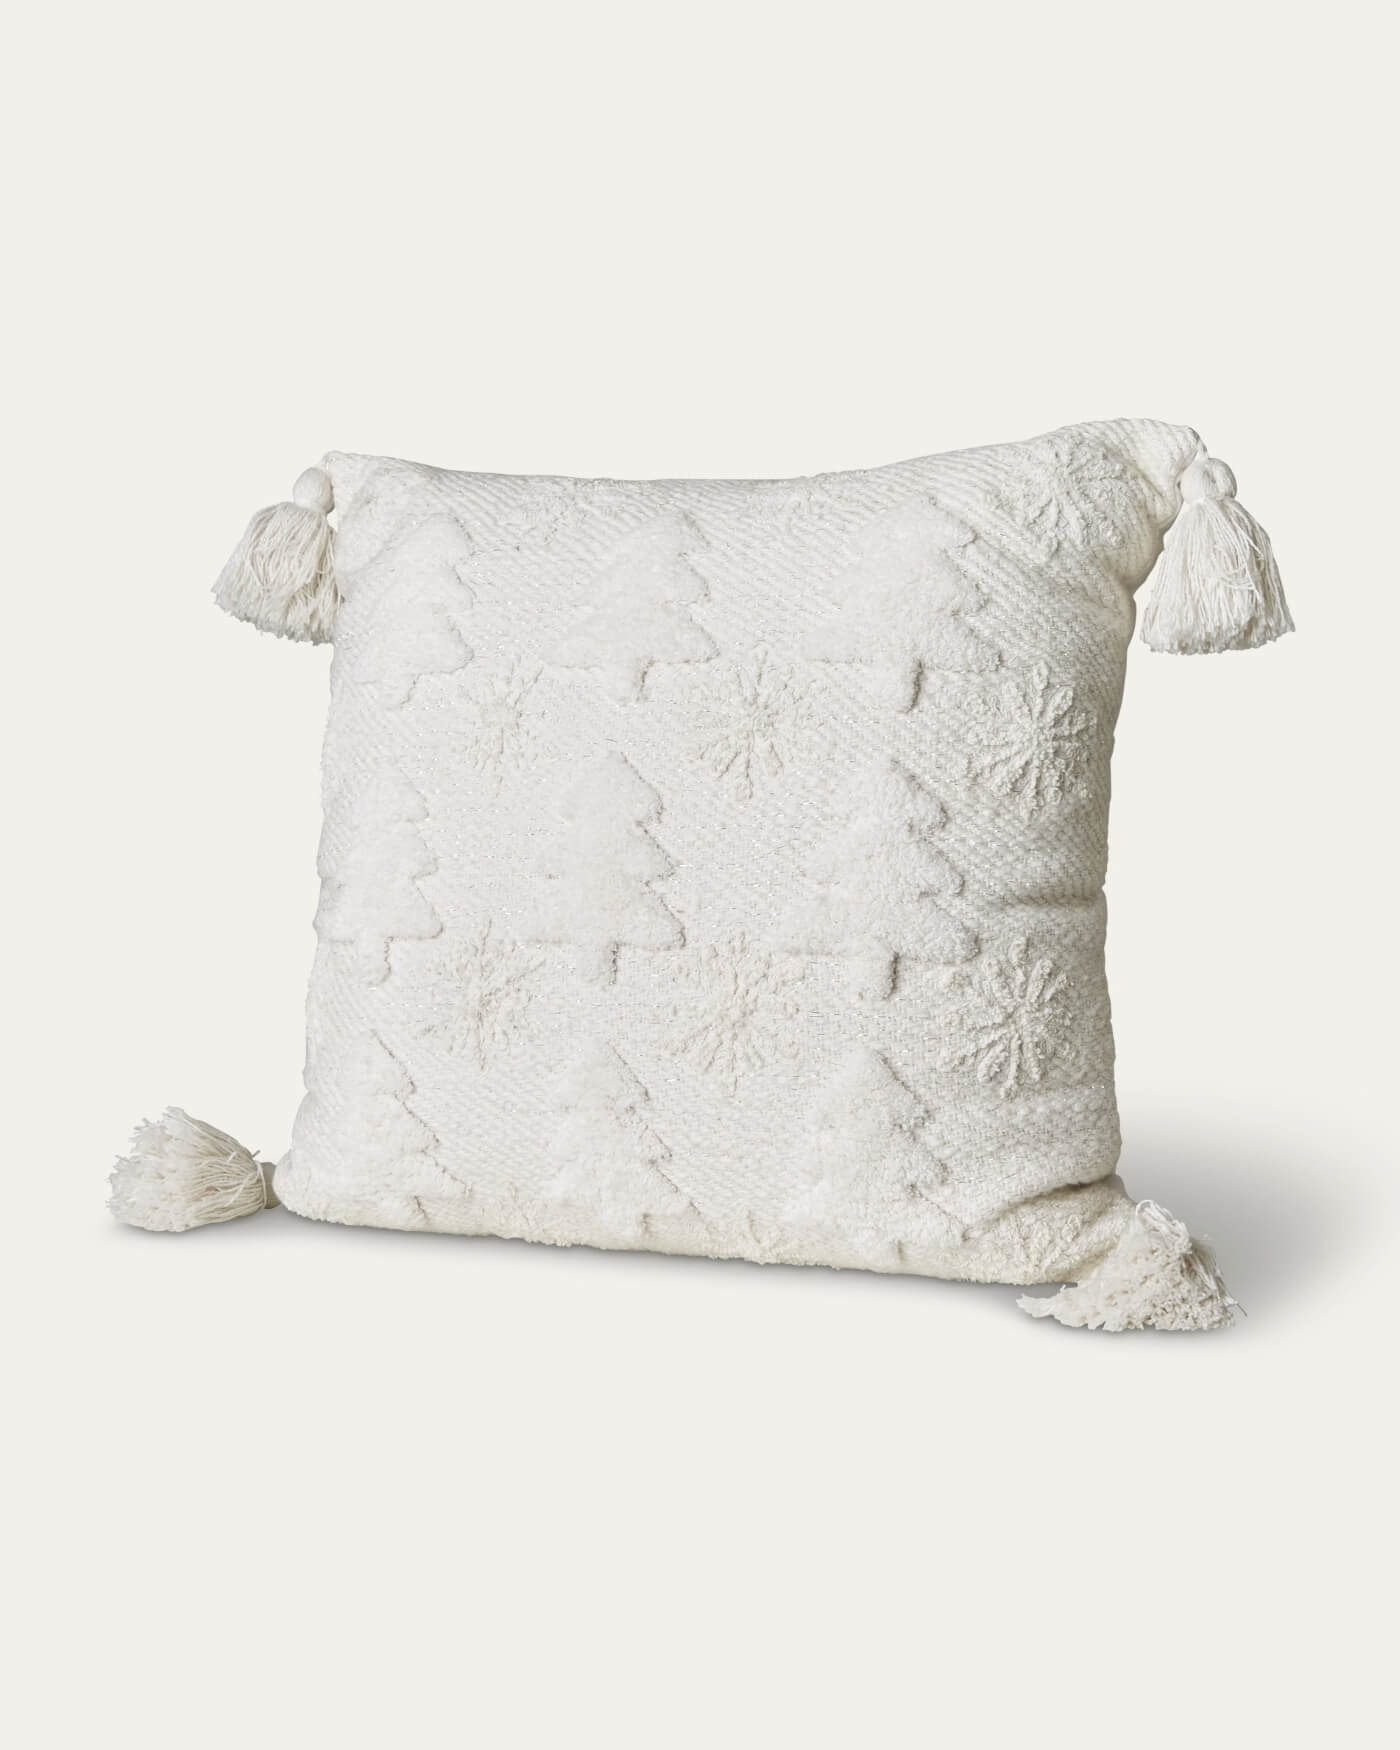 Handwoven Tufted Trees and Snowflakes Pillow | Magaschoni Home | JANE + MERCER